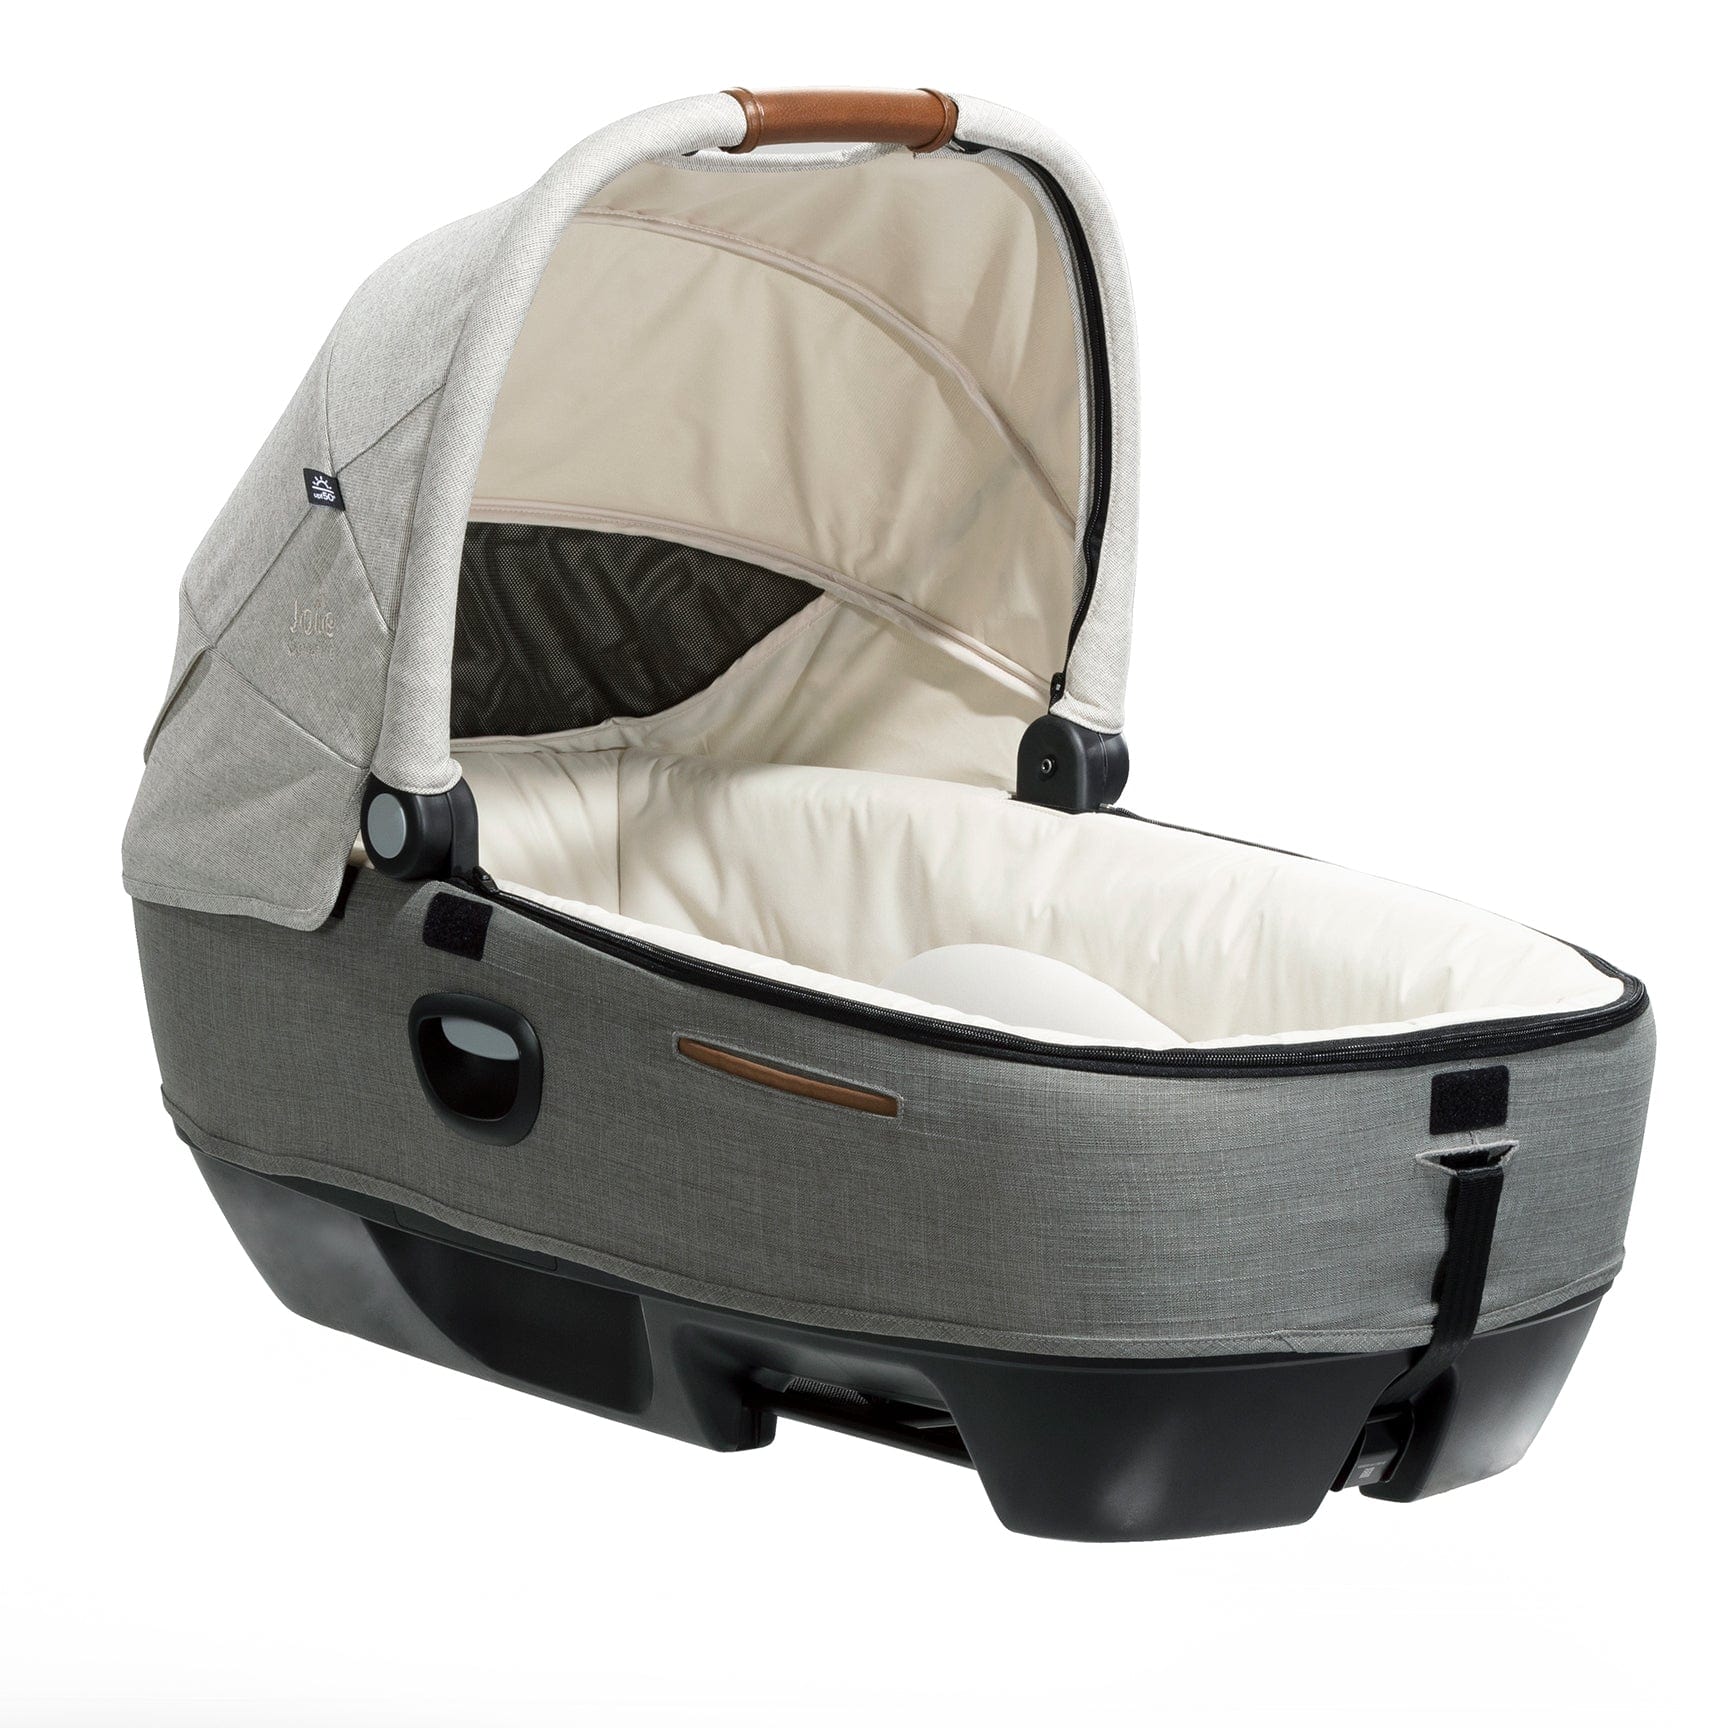 Calmi Car Cot Bed & I-Base Encore in Oyster 0-76 cm (Infant carriers) 12219-OYS 5056080612423